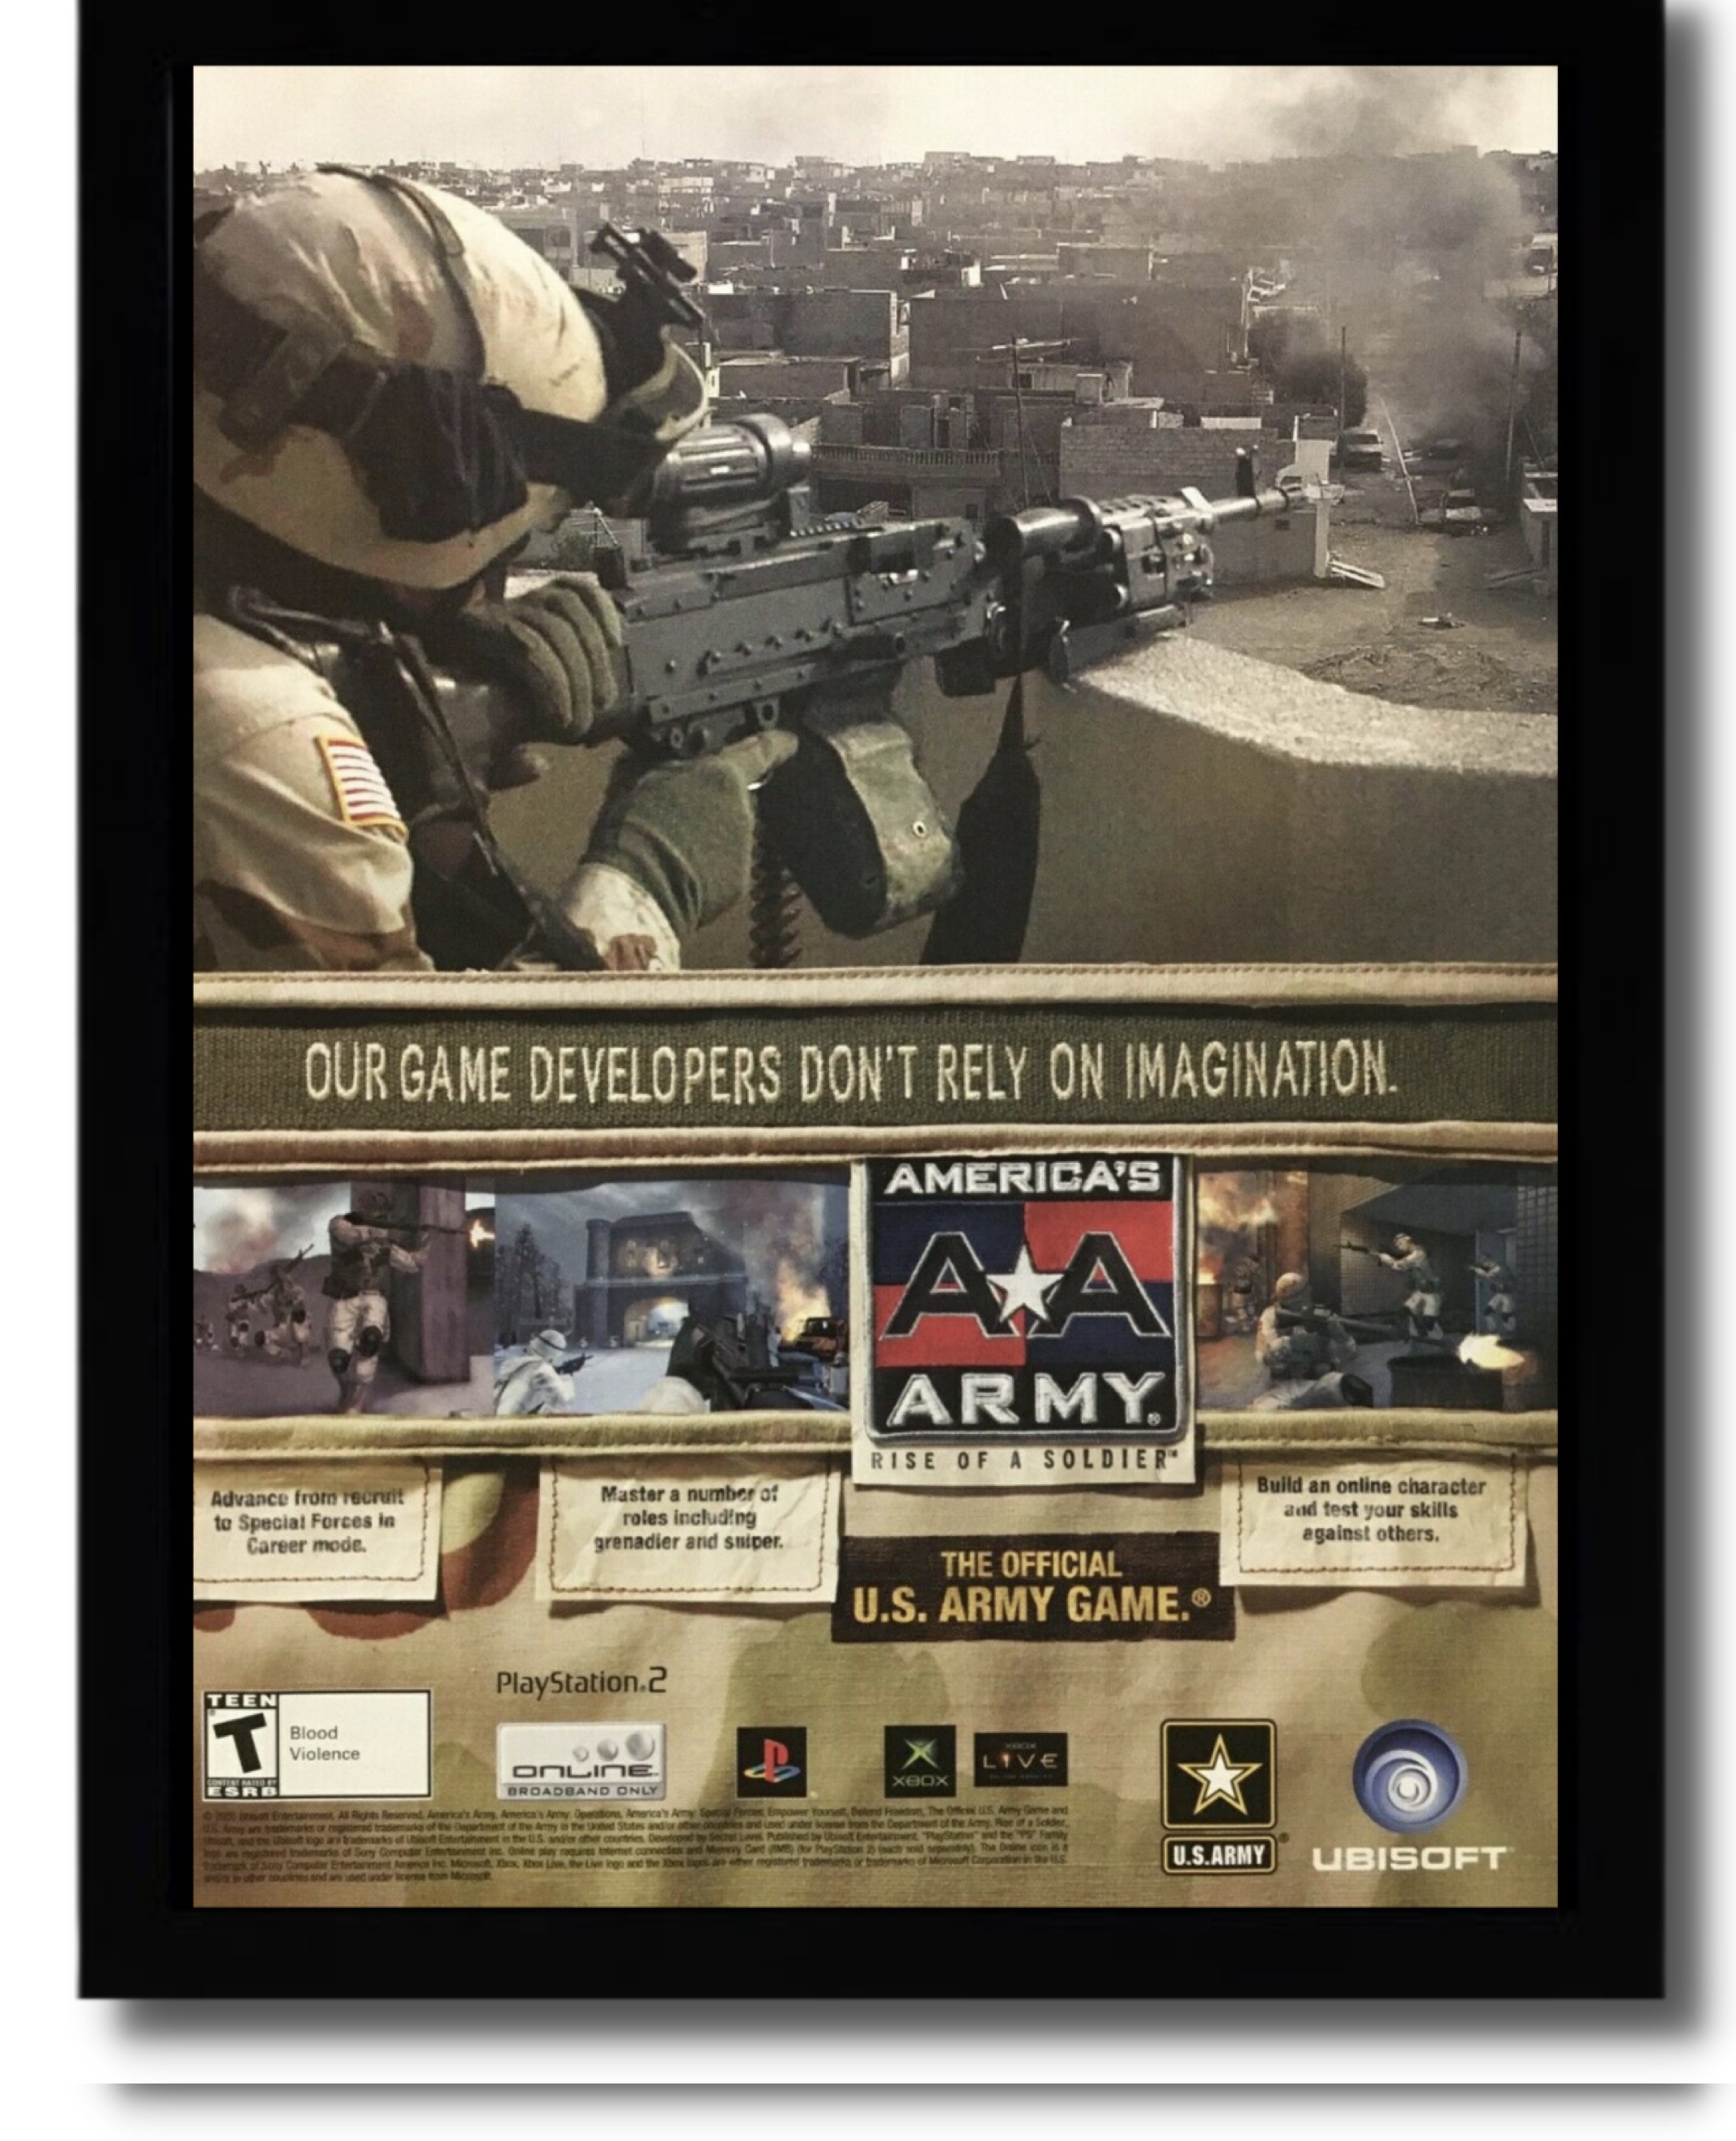 The back cover of the 2005 version of America’s Army